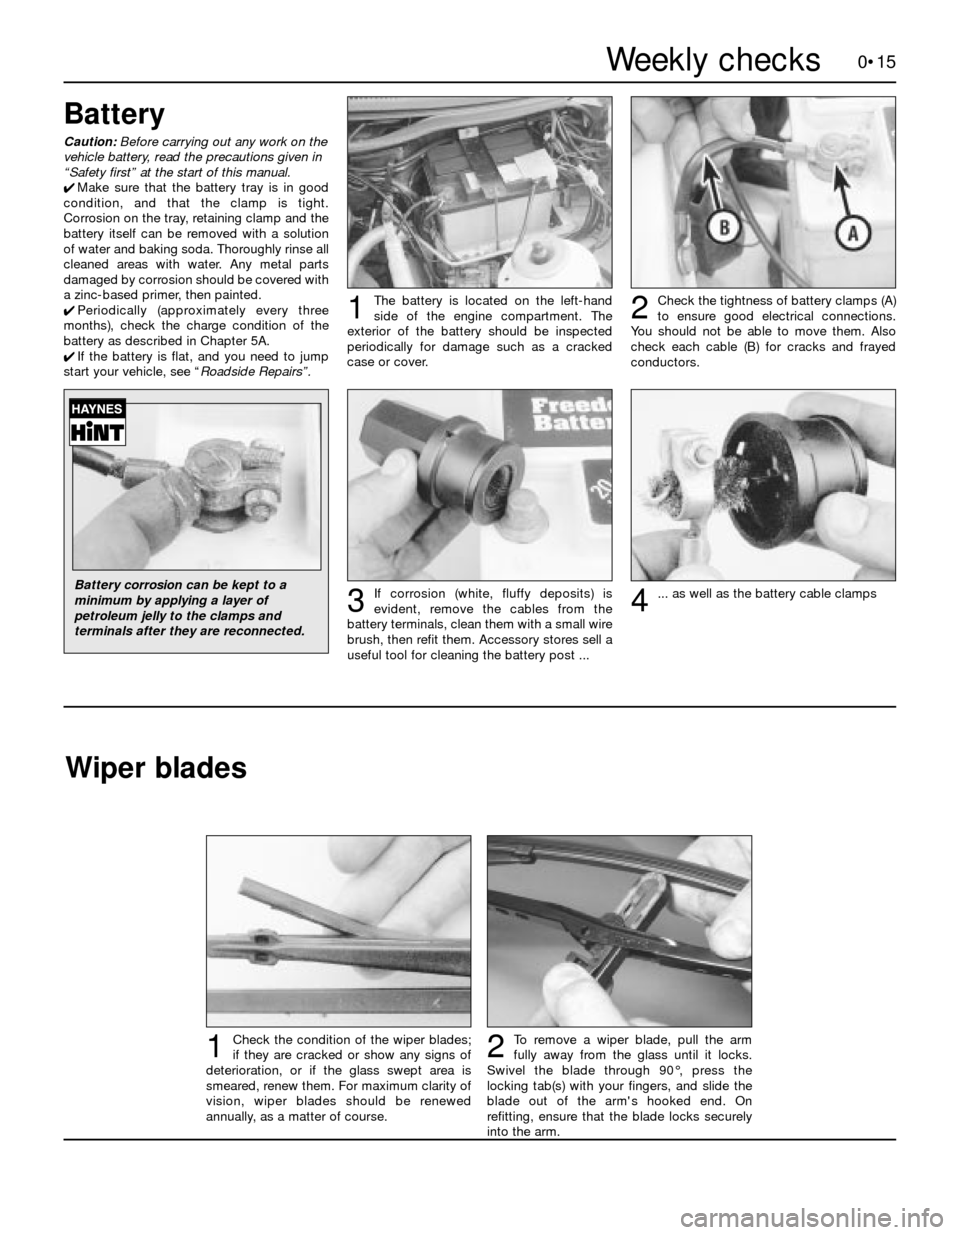 FORD SIERRA 1987 2.G Introduction User Guide 0•15
To remove a wiper blade, pull the arm
fully away from the glass until it locks.
Swivel the blade through 90°, press the
locking tab(s) with your fingers, and slide the
blade out of the arms h